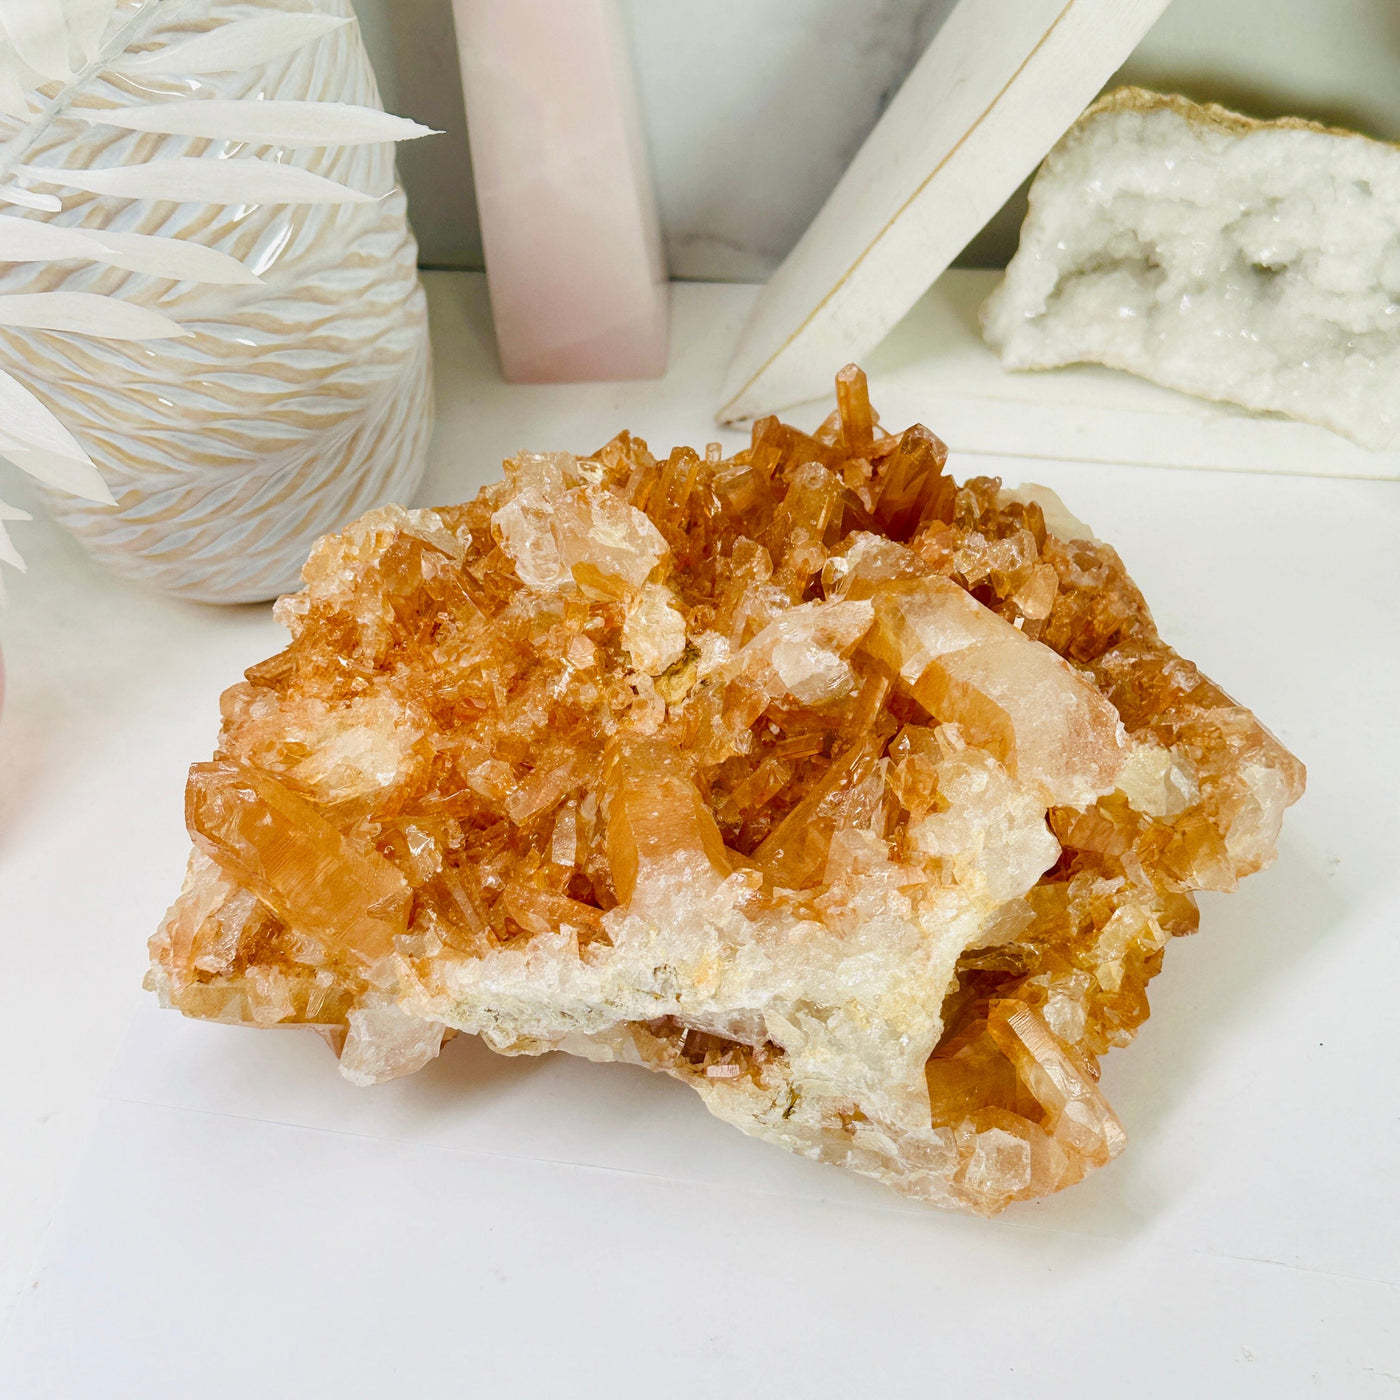 Tangerine Quartz Cluster - High Quality Crystal Cluster front view